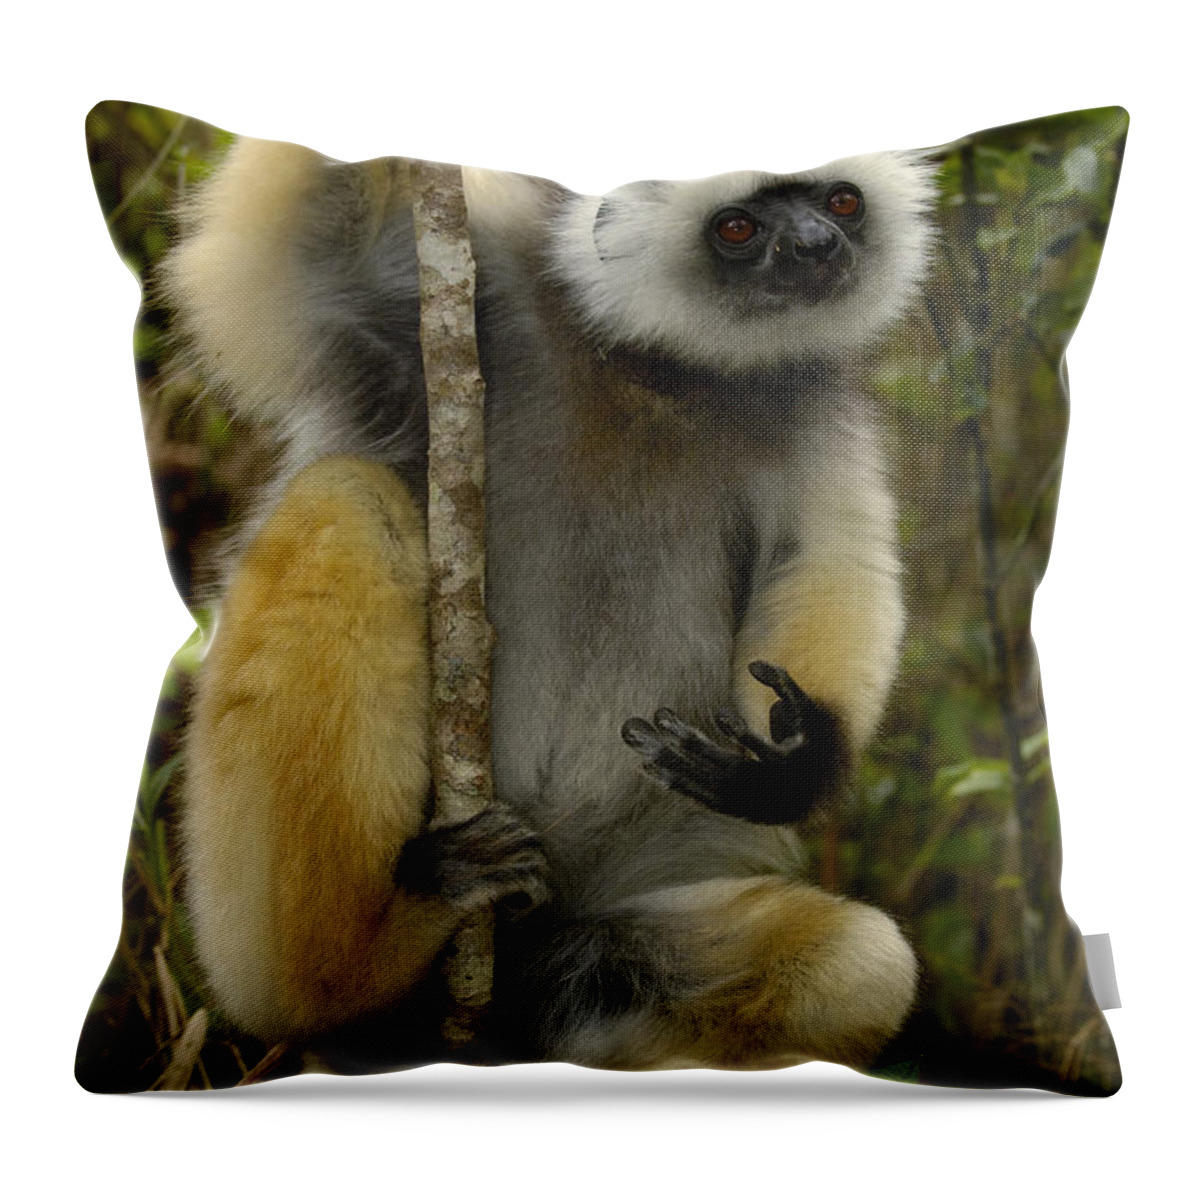 Feb0514 Throw Pillow featuring the photograph Diademed Sifaka Madagascar by Pete Oxford